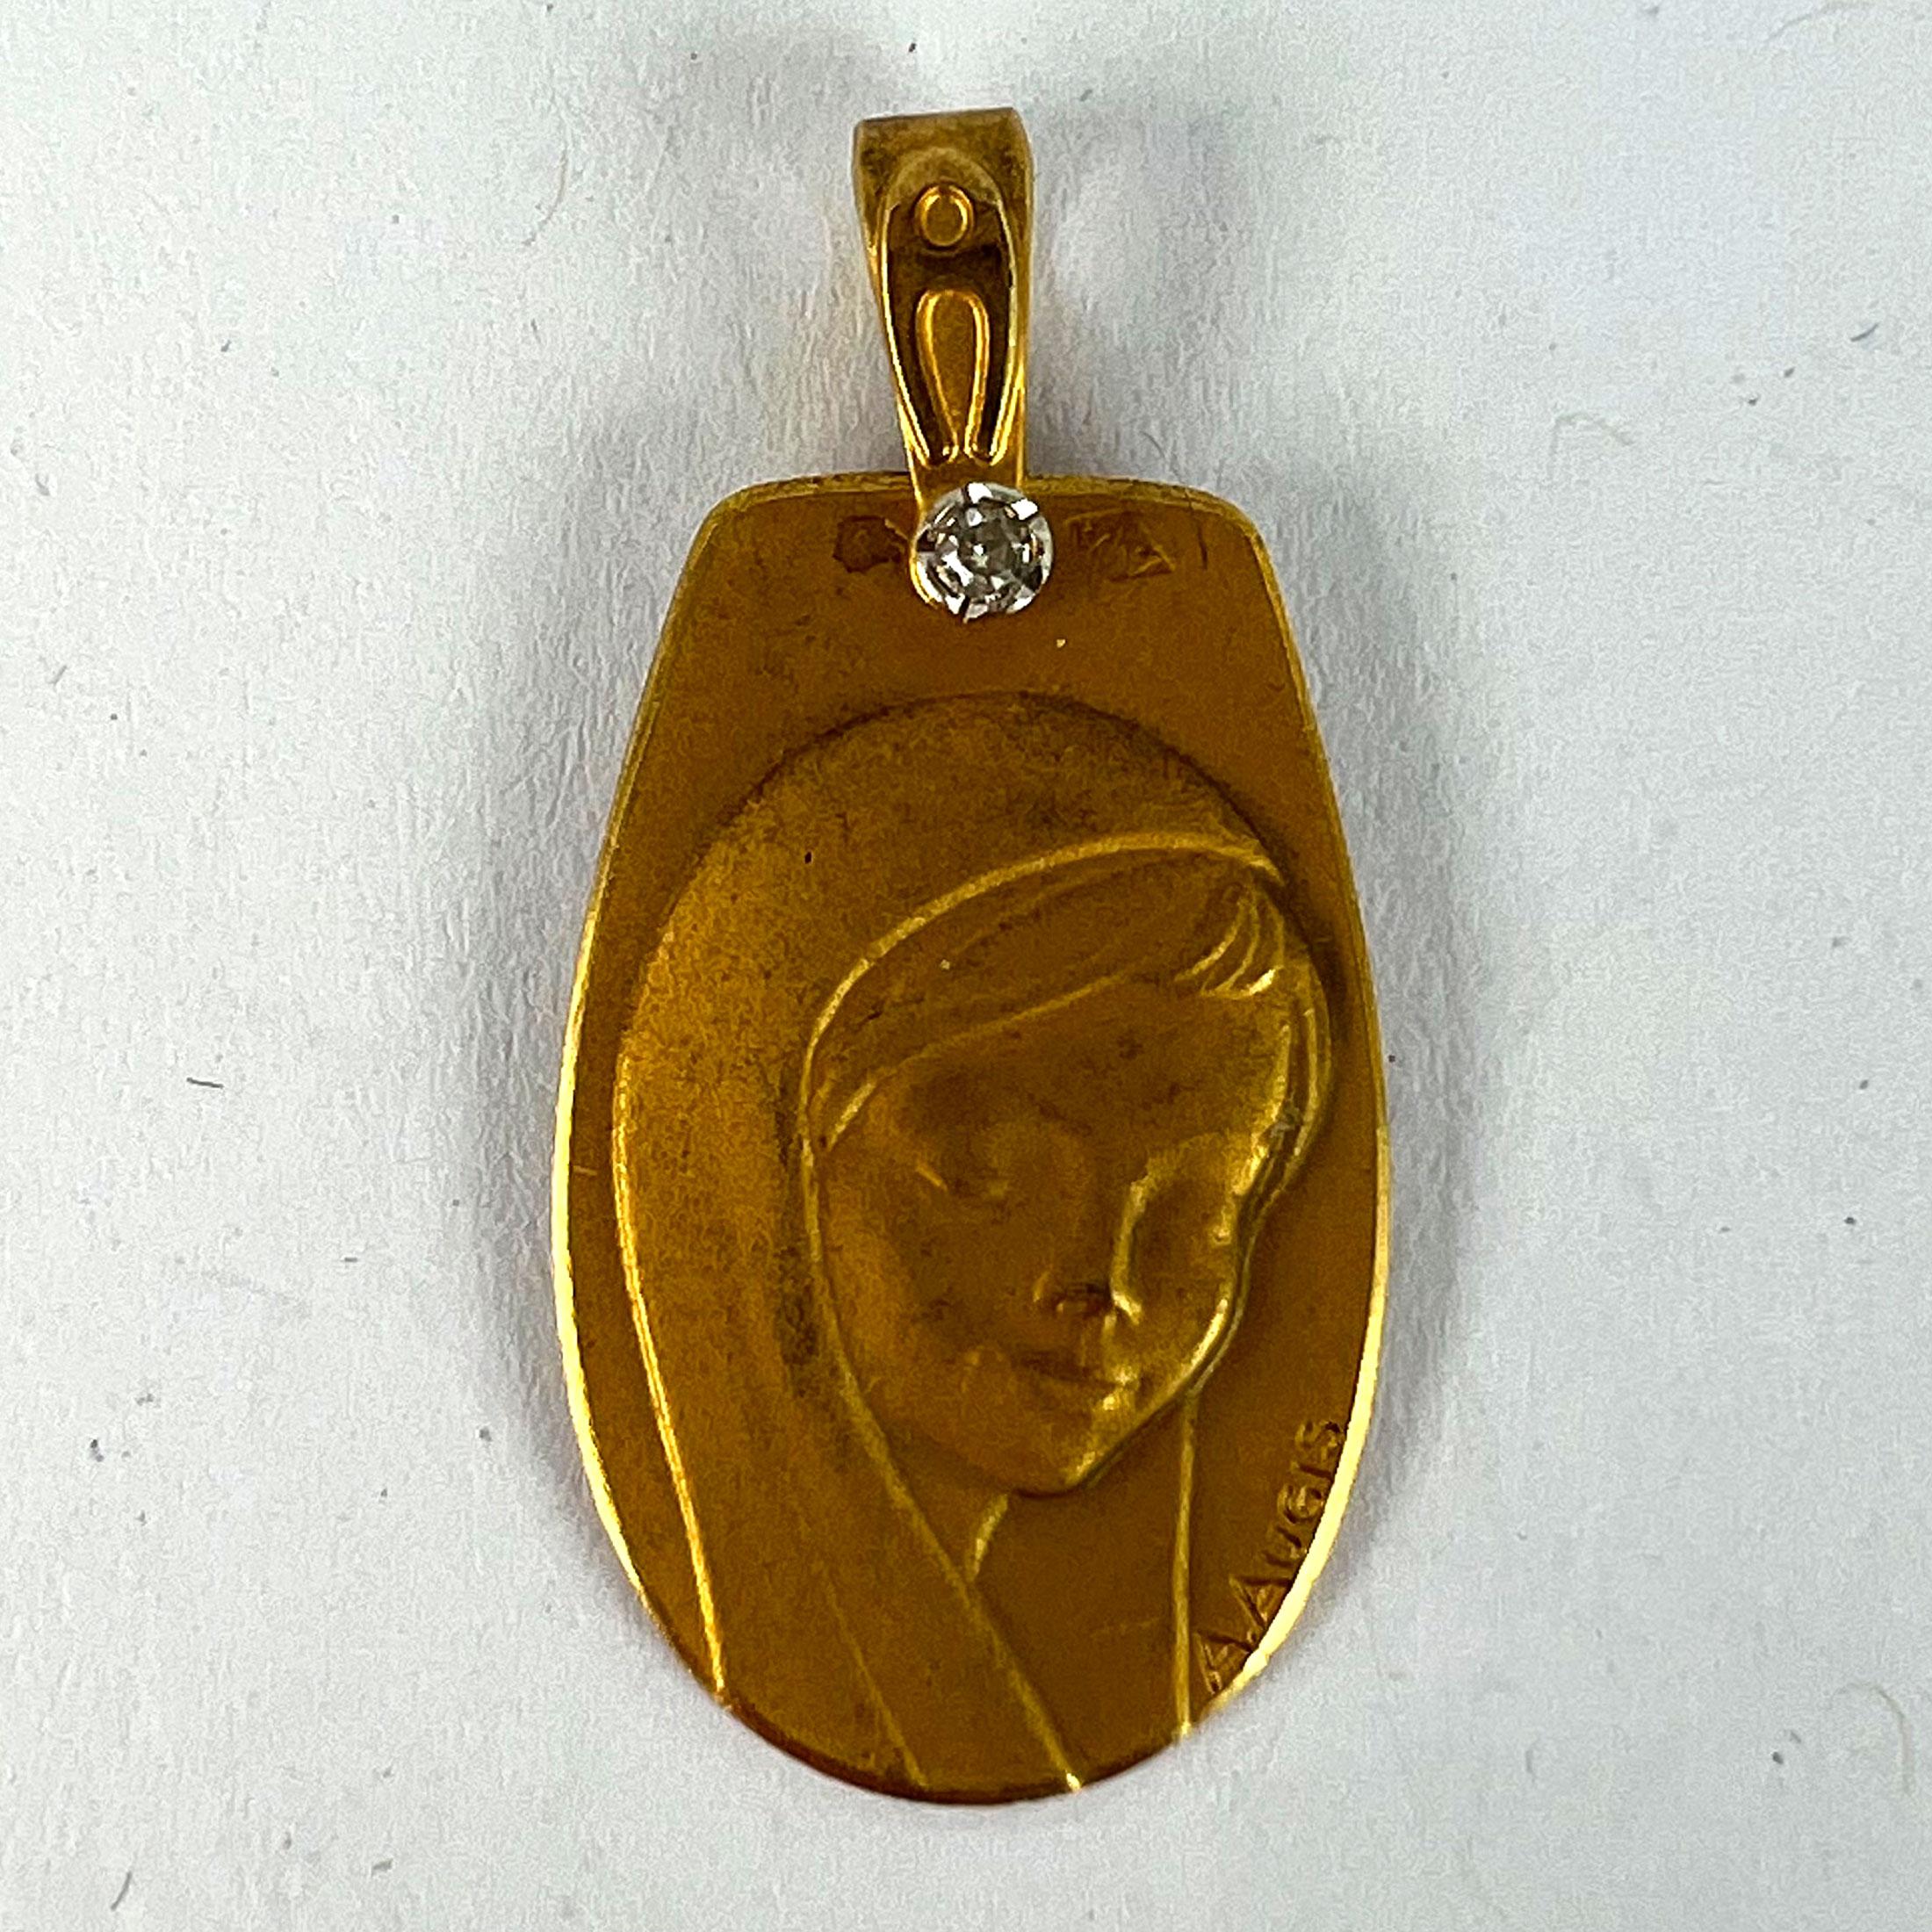 French Augis Virgin Mary 18K Yellow Gold Diamond Religious Medal Pendant For Sale 6